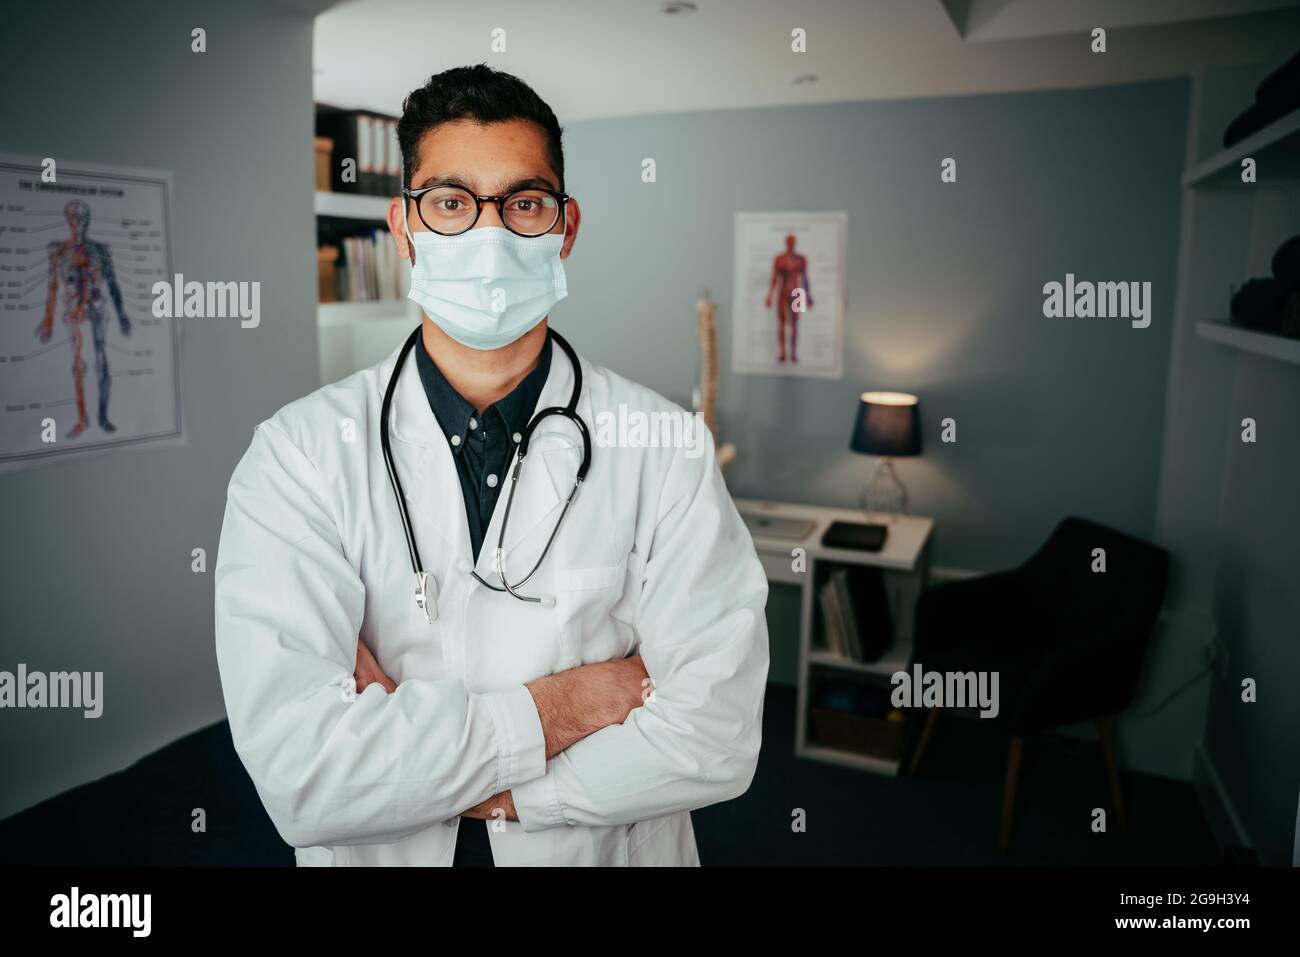 Mixed race male working in clinic wearing surgical mask Stock Photo